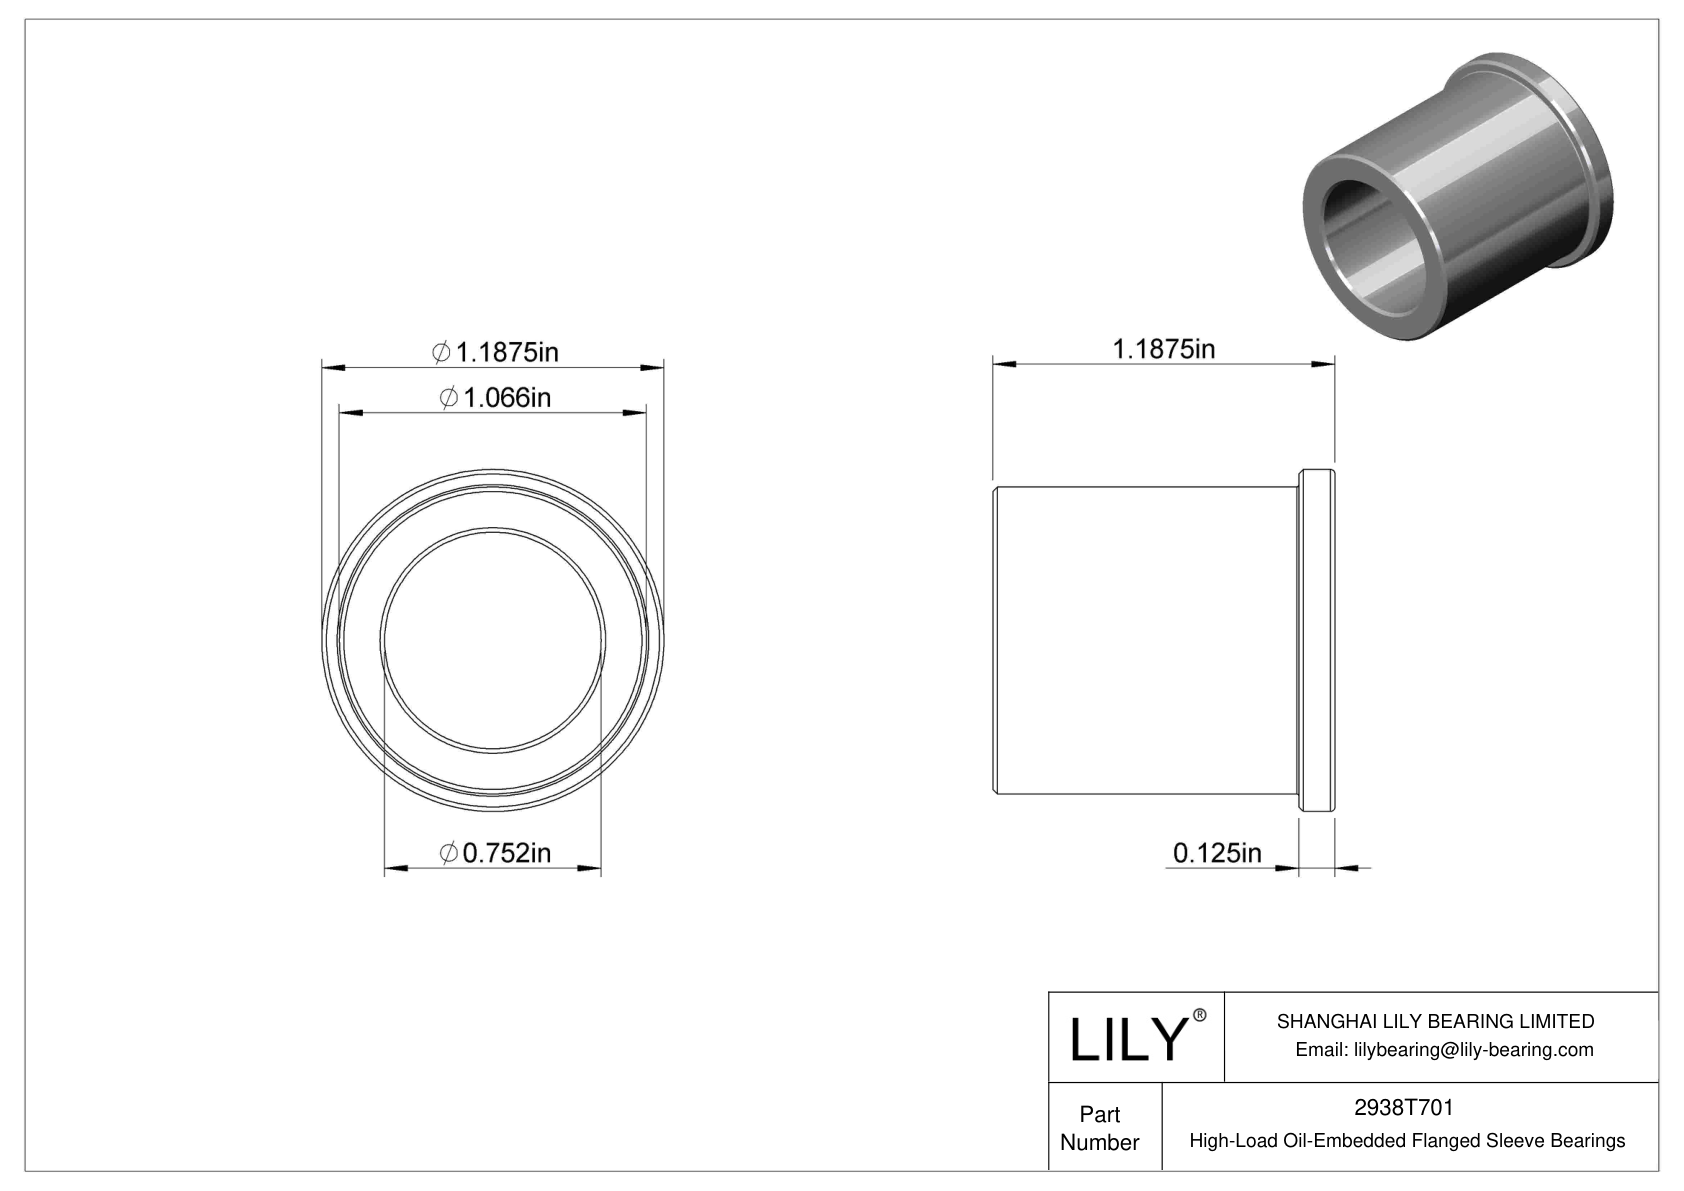 CJDITHAB High-Load Oil-Embedded Flanged Sleeve Bearings cad drawing